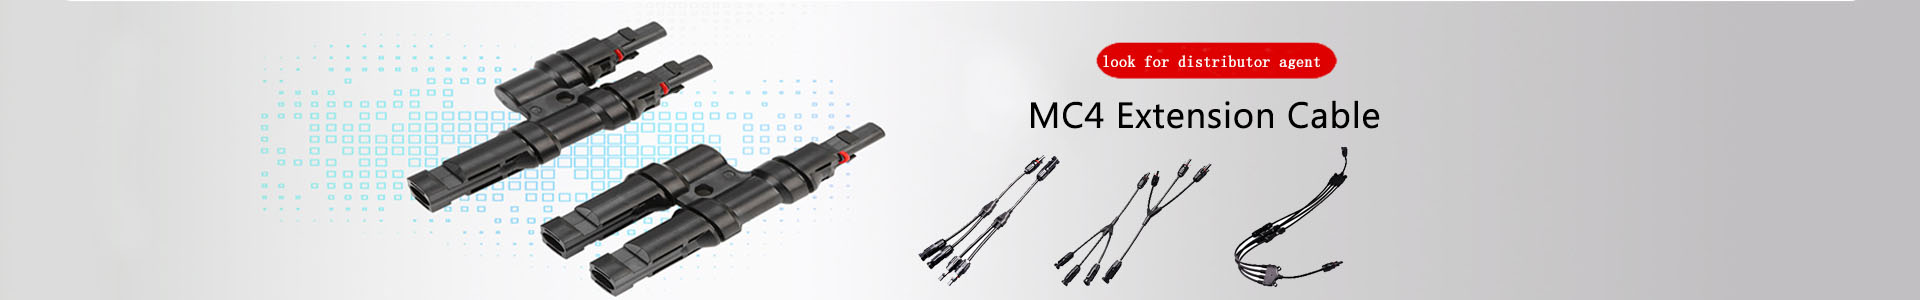 Protection performance of photovoltaic connectors-Company news-Solar | solar connector,solar branch connector,diode fuse connector,MC4 extnsion cable,H1Z2Z2 solar cable, UL4703 solar cable | Leading manufacturer and supplier of solar pv cables and connectors